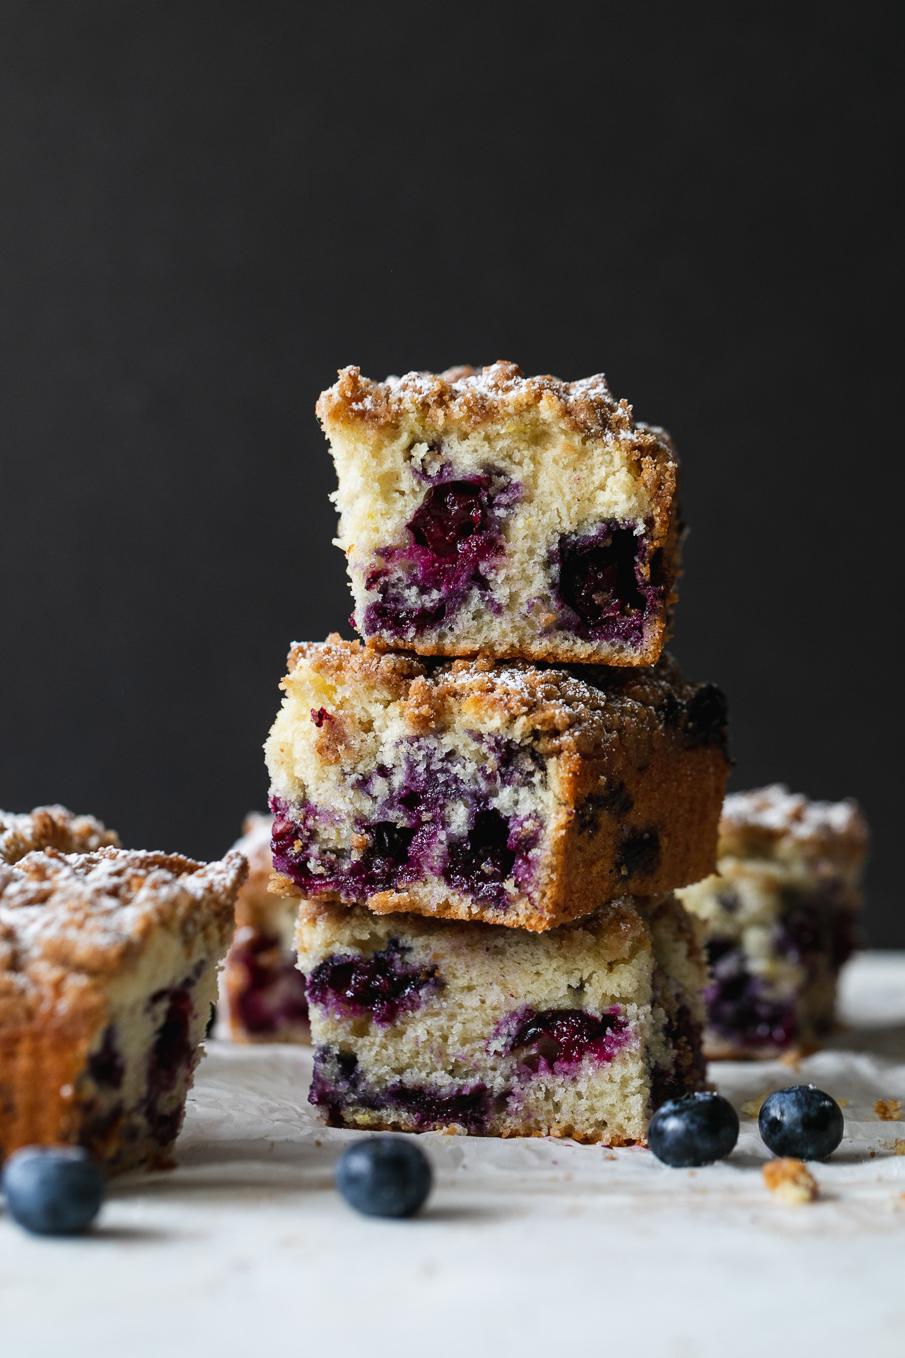  Add some color to your coffee break with this stunning blueberry coffee cake.